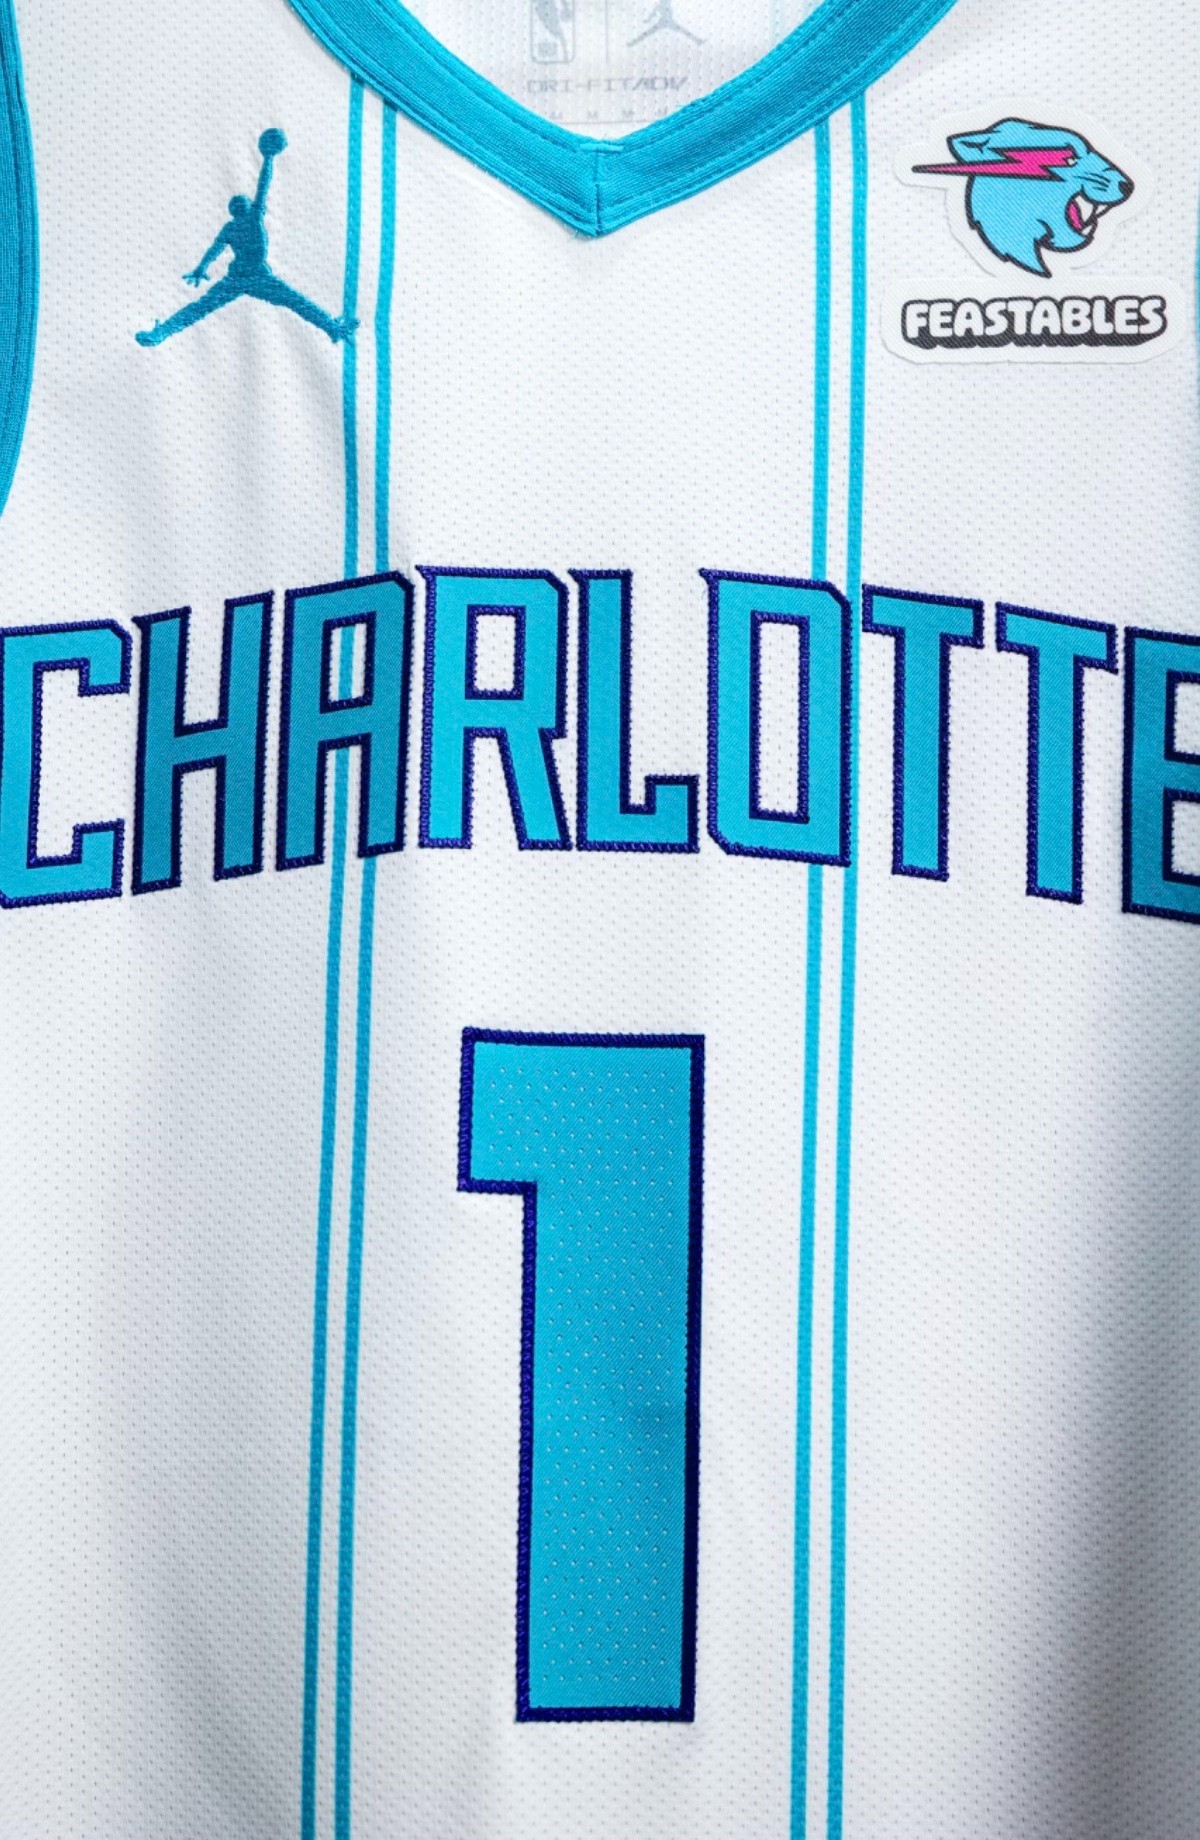 A Sweet Deal! Hornets Sign Groundbreaking Jersey Patch Partnership With   Icon MrBeast's Feastables Brand